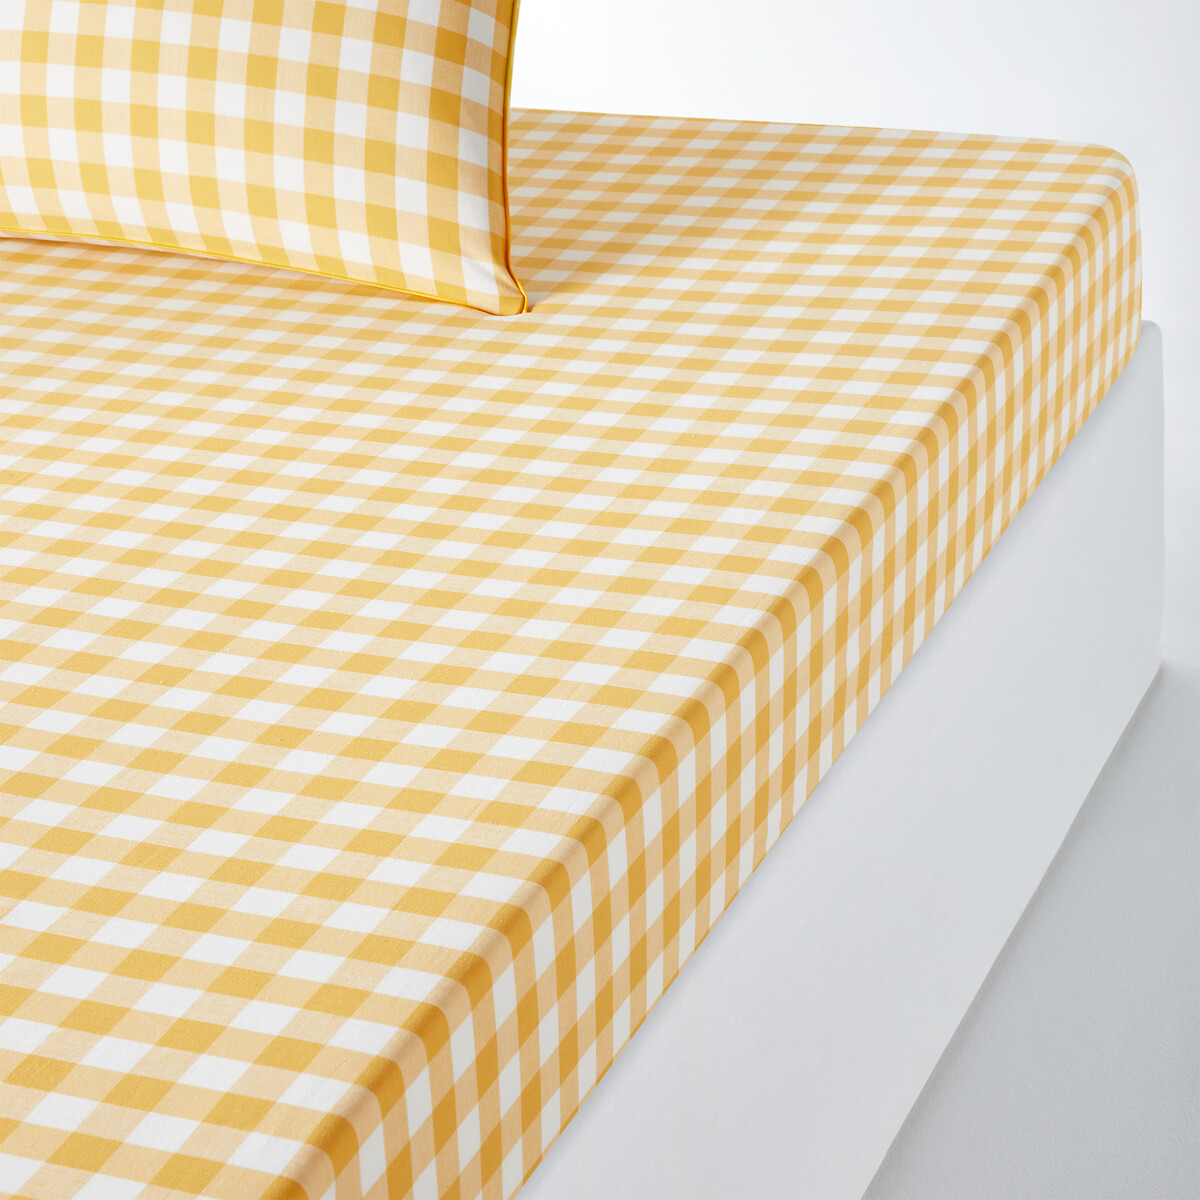 Veldi Yellow Gingham Check 100% Cotton Fitted Sheet